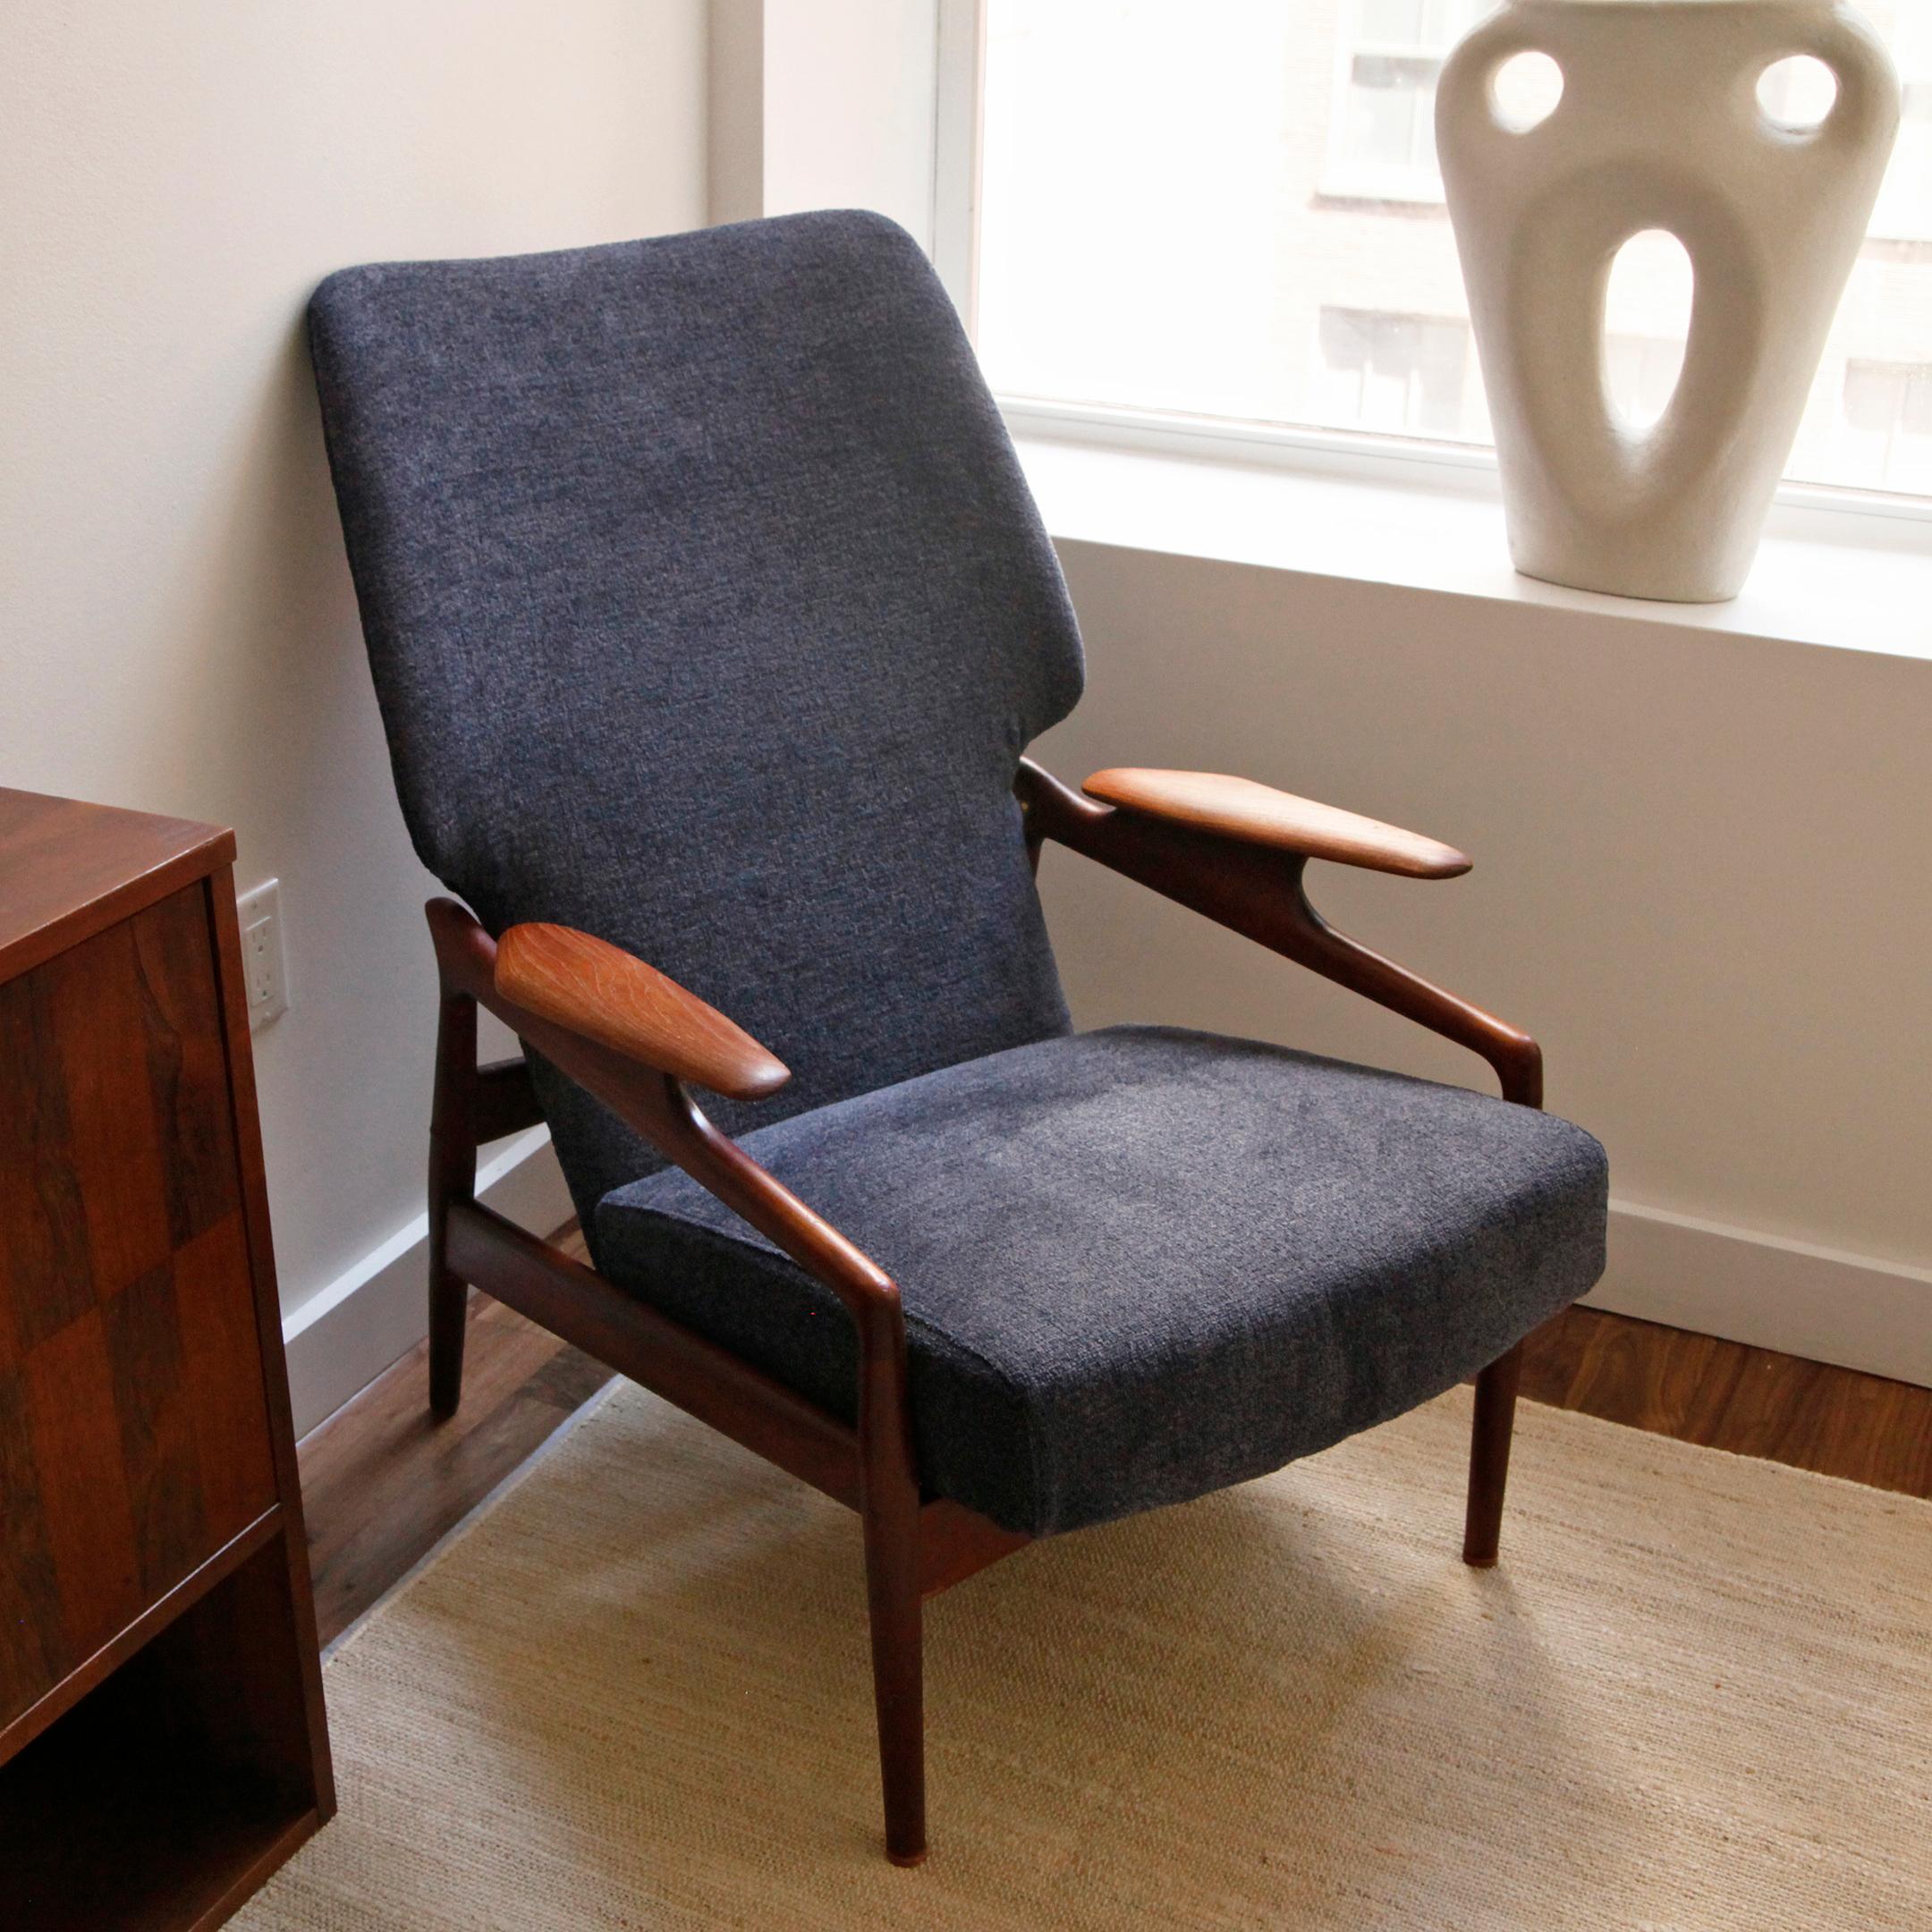 This 1960s teak lounge chair by the Danish designer John Boné for Advance Design. Reupholstered in a deep navy bouclé, the wingback chair is a statement sitting on a solid teak sculpted frame. The chair adjusts manually into 3 different positions to